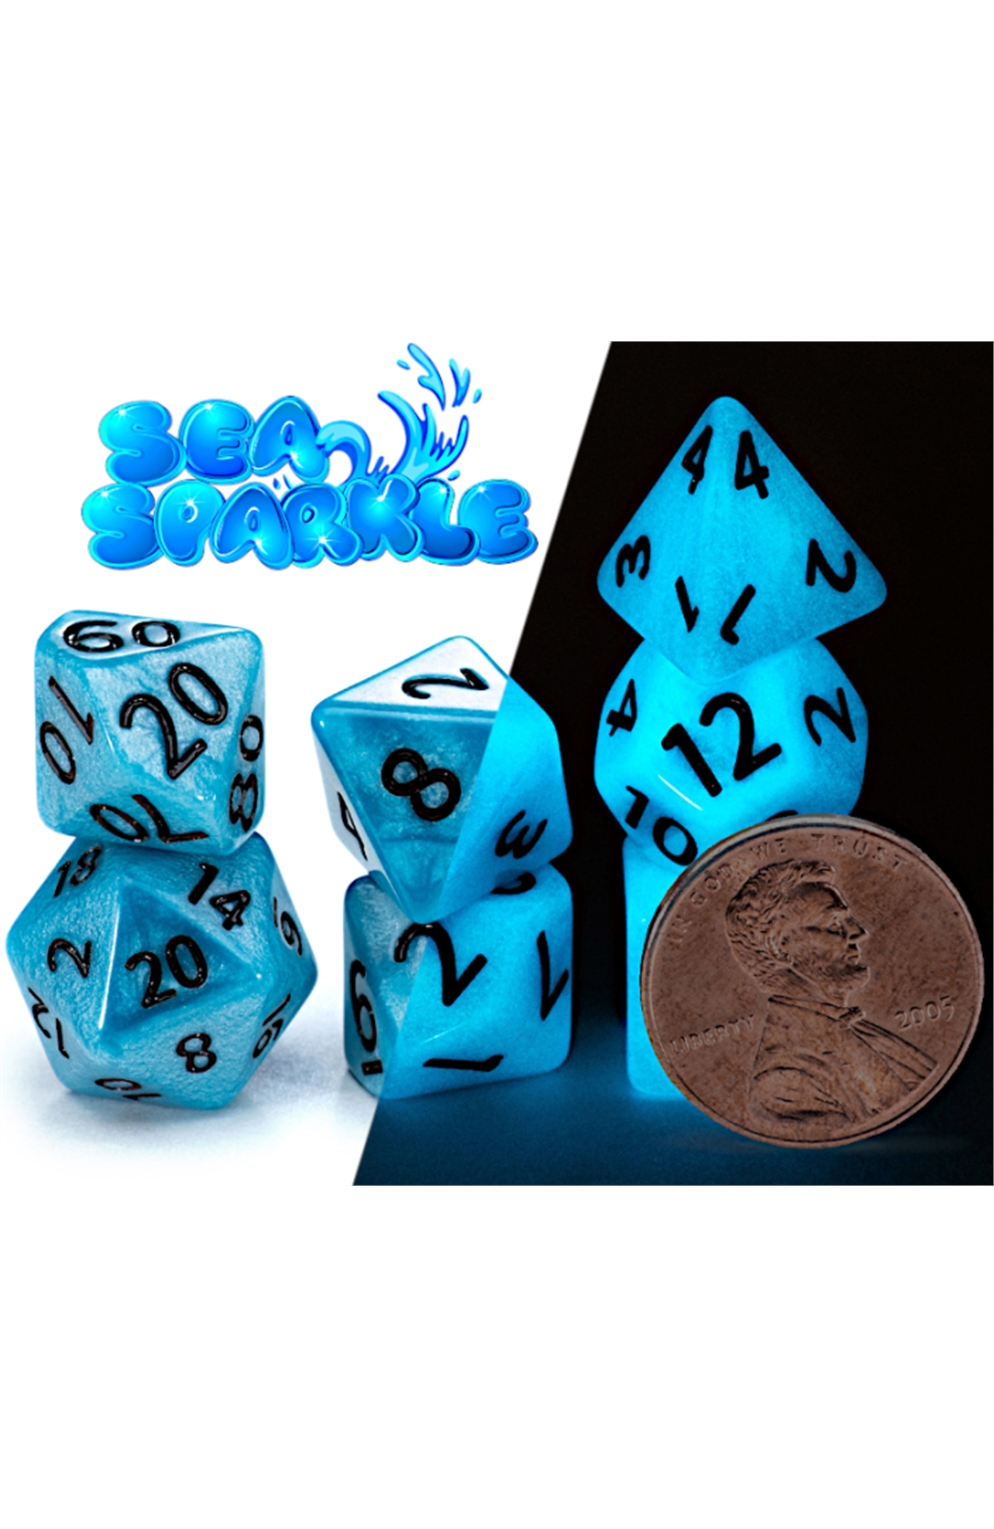 Gate Keeper Sea Sparkle 12Mm Glow-In-The-Dark Mighty Tiny Dice (7)